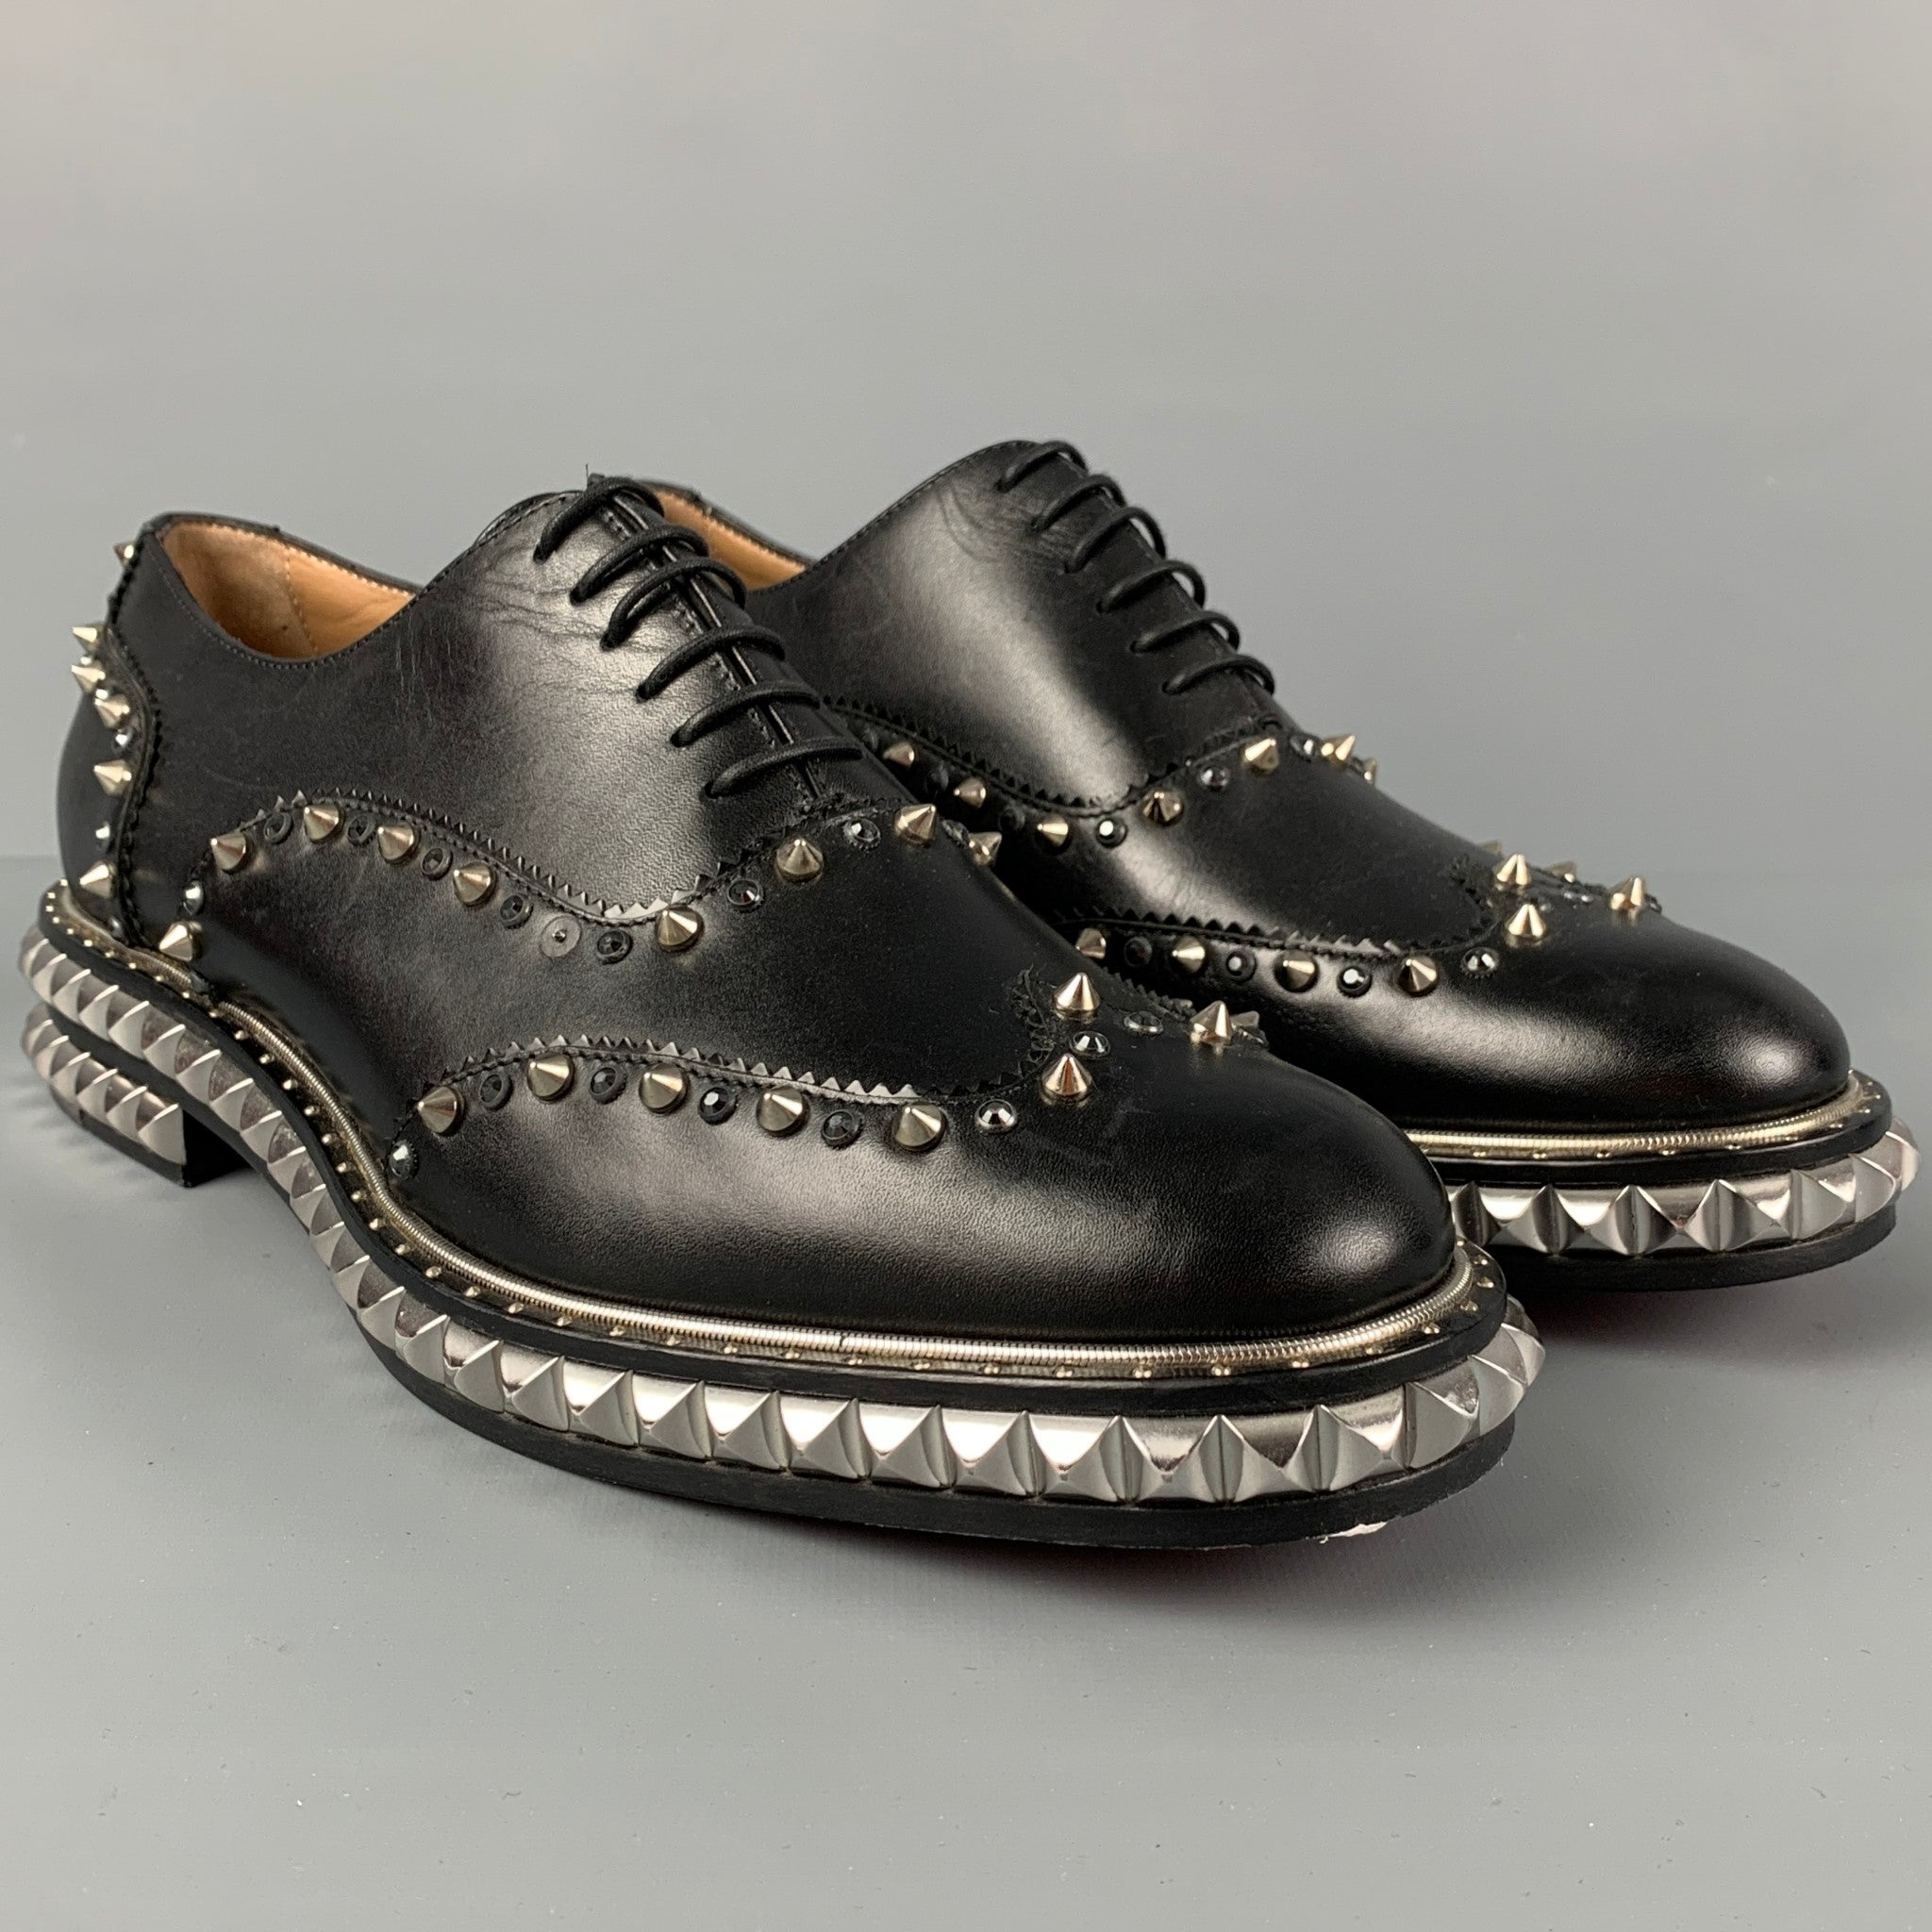 CHRISTIAN LOUBOUTIN Size 8 Black Studded Leather Wingtip Lace Up